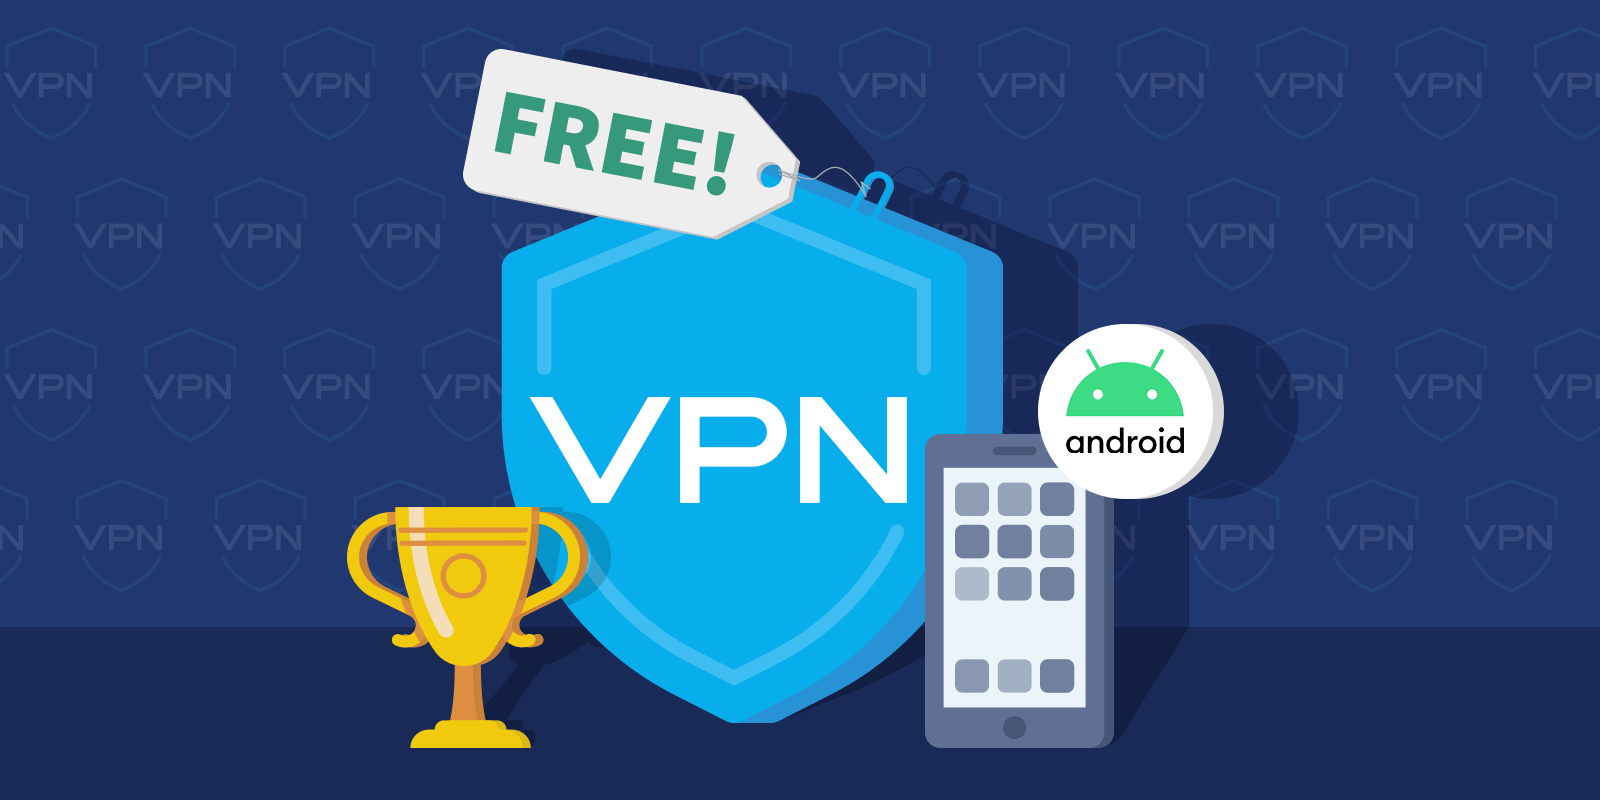 Free VPN Overview - The Best Free VPN for Android